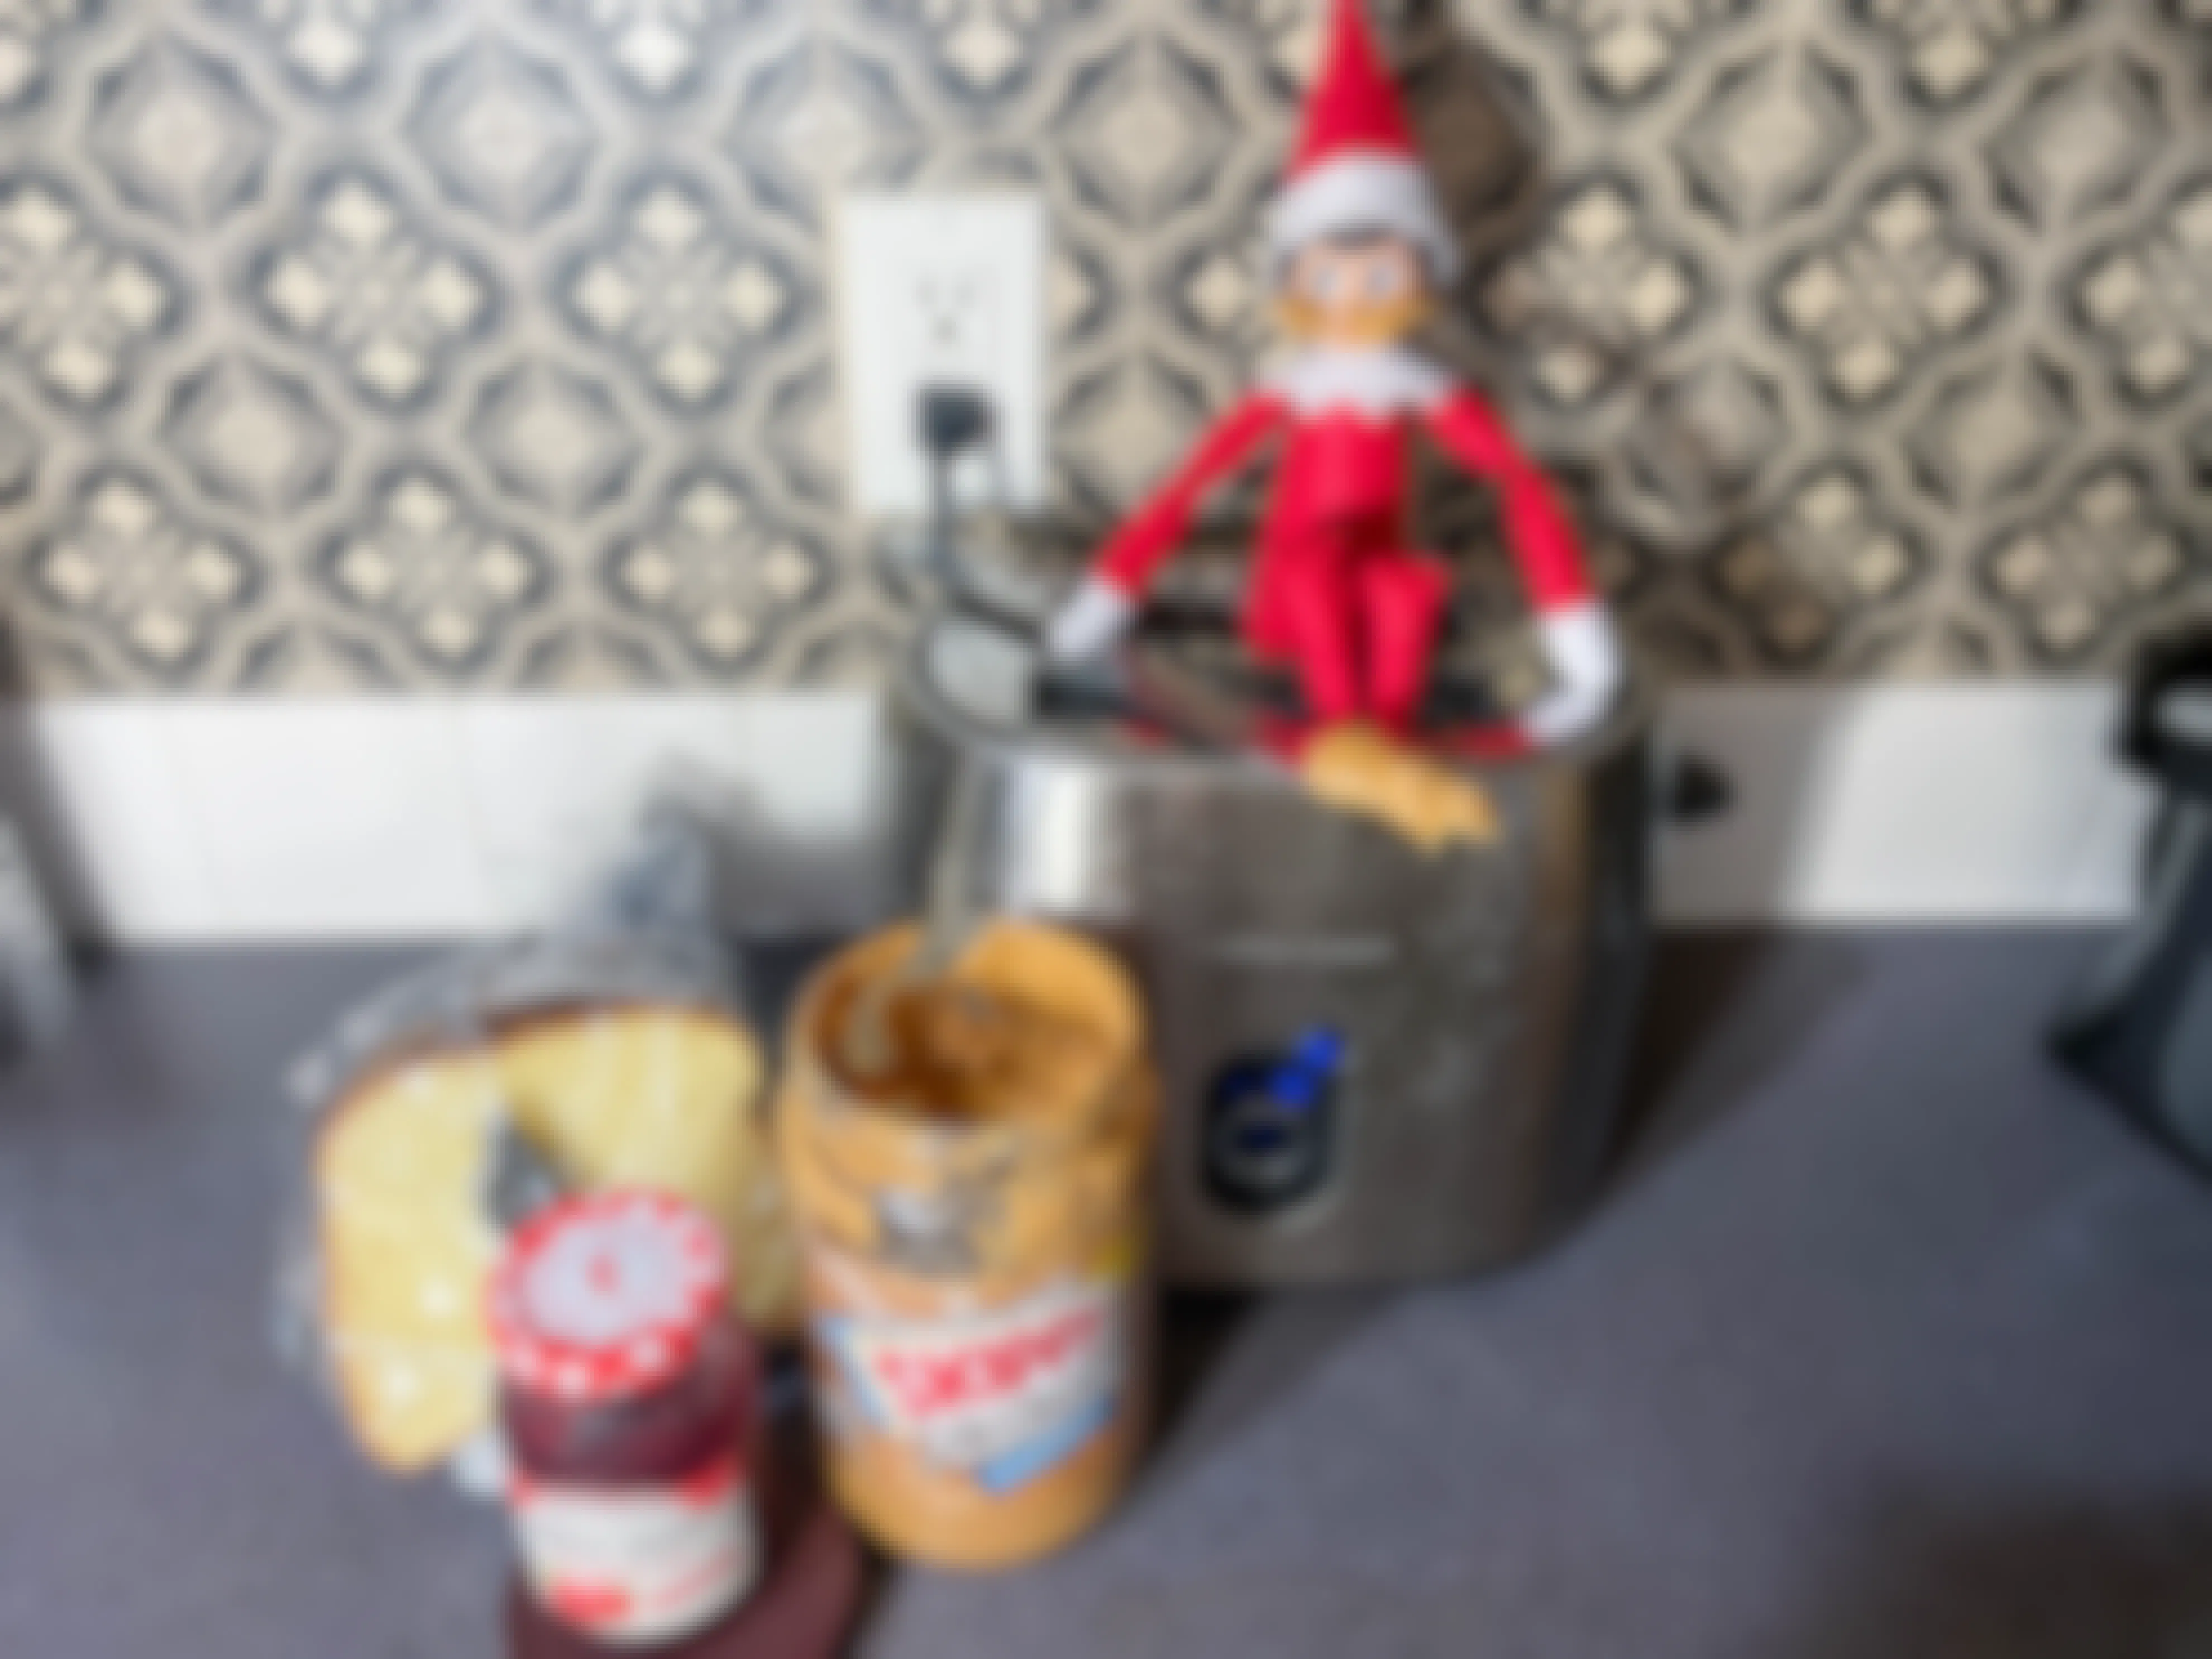 an elf on the shelf doll sitting on a toaster with a knife loaded with peanut butter and peanut butter on its face with bread, jam, and jar of peanut butter next to the toaster 